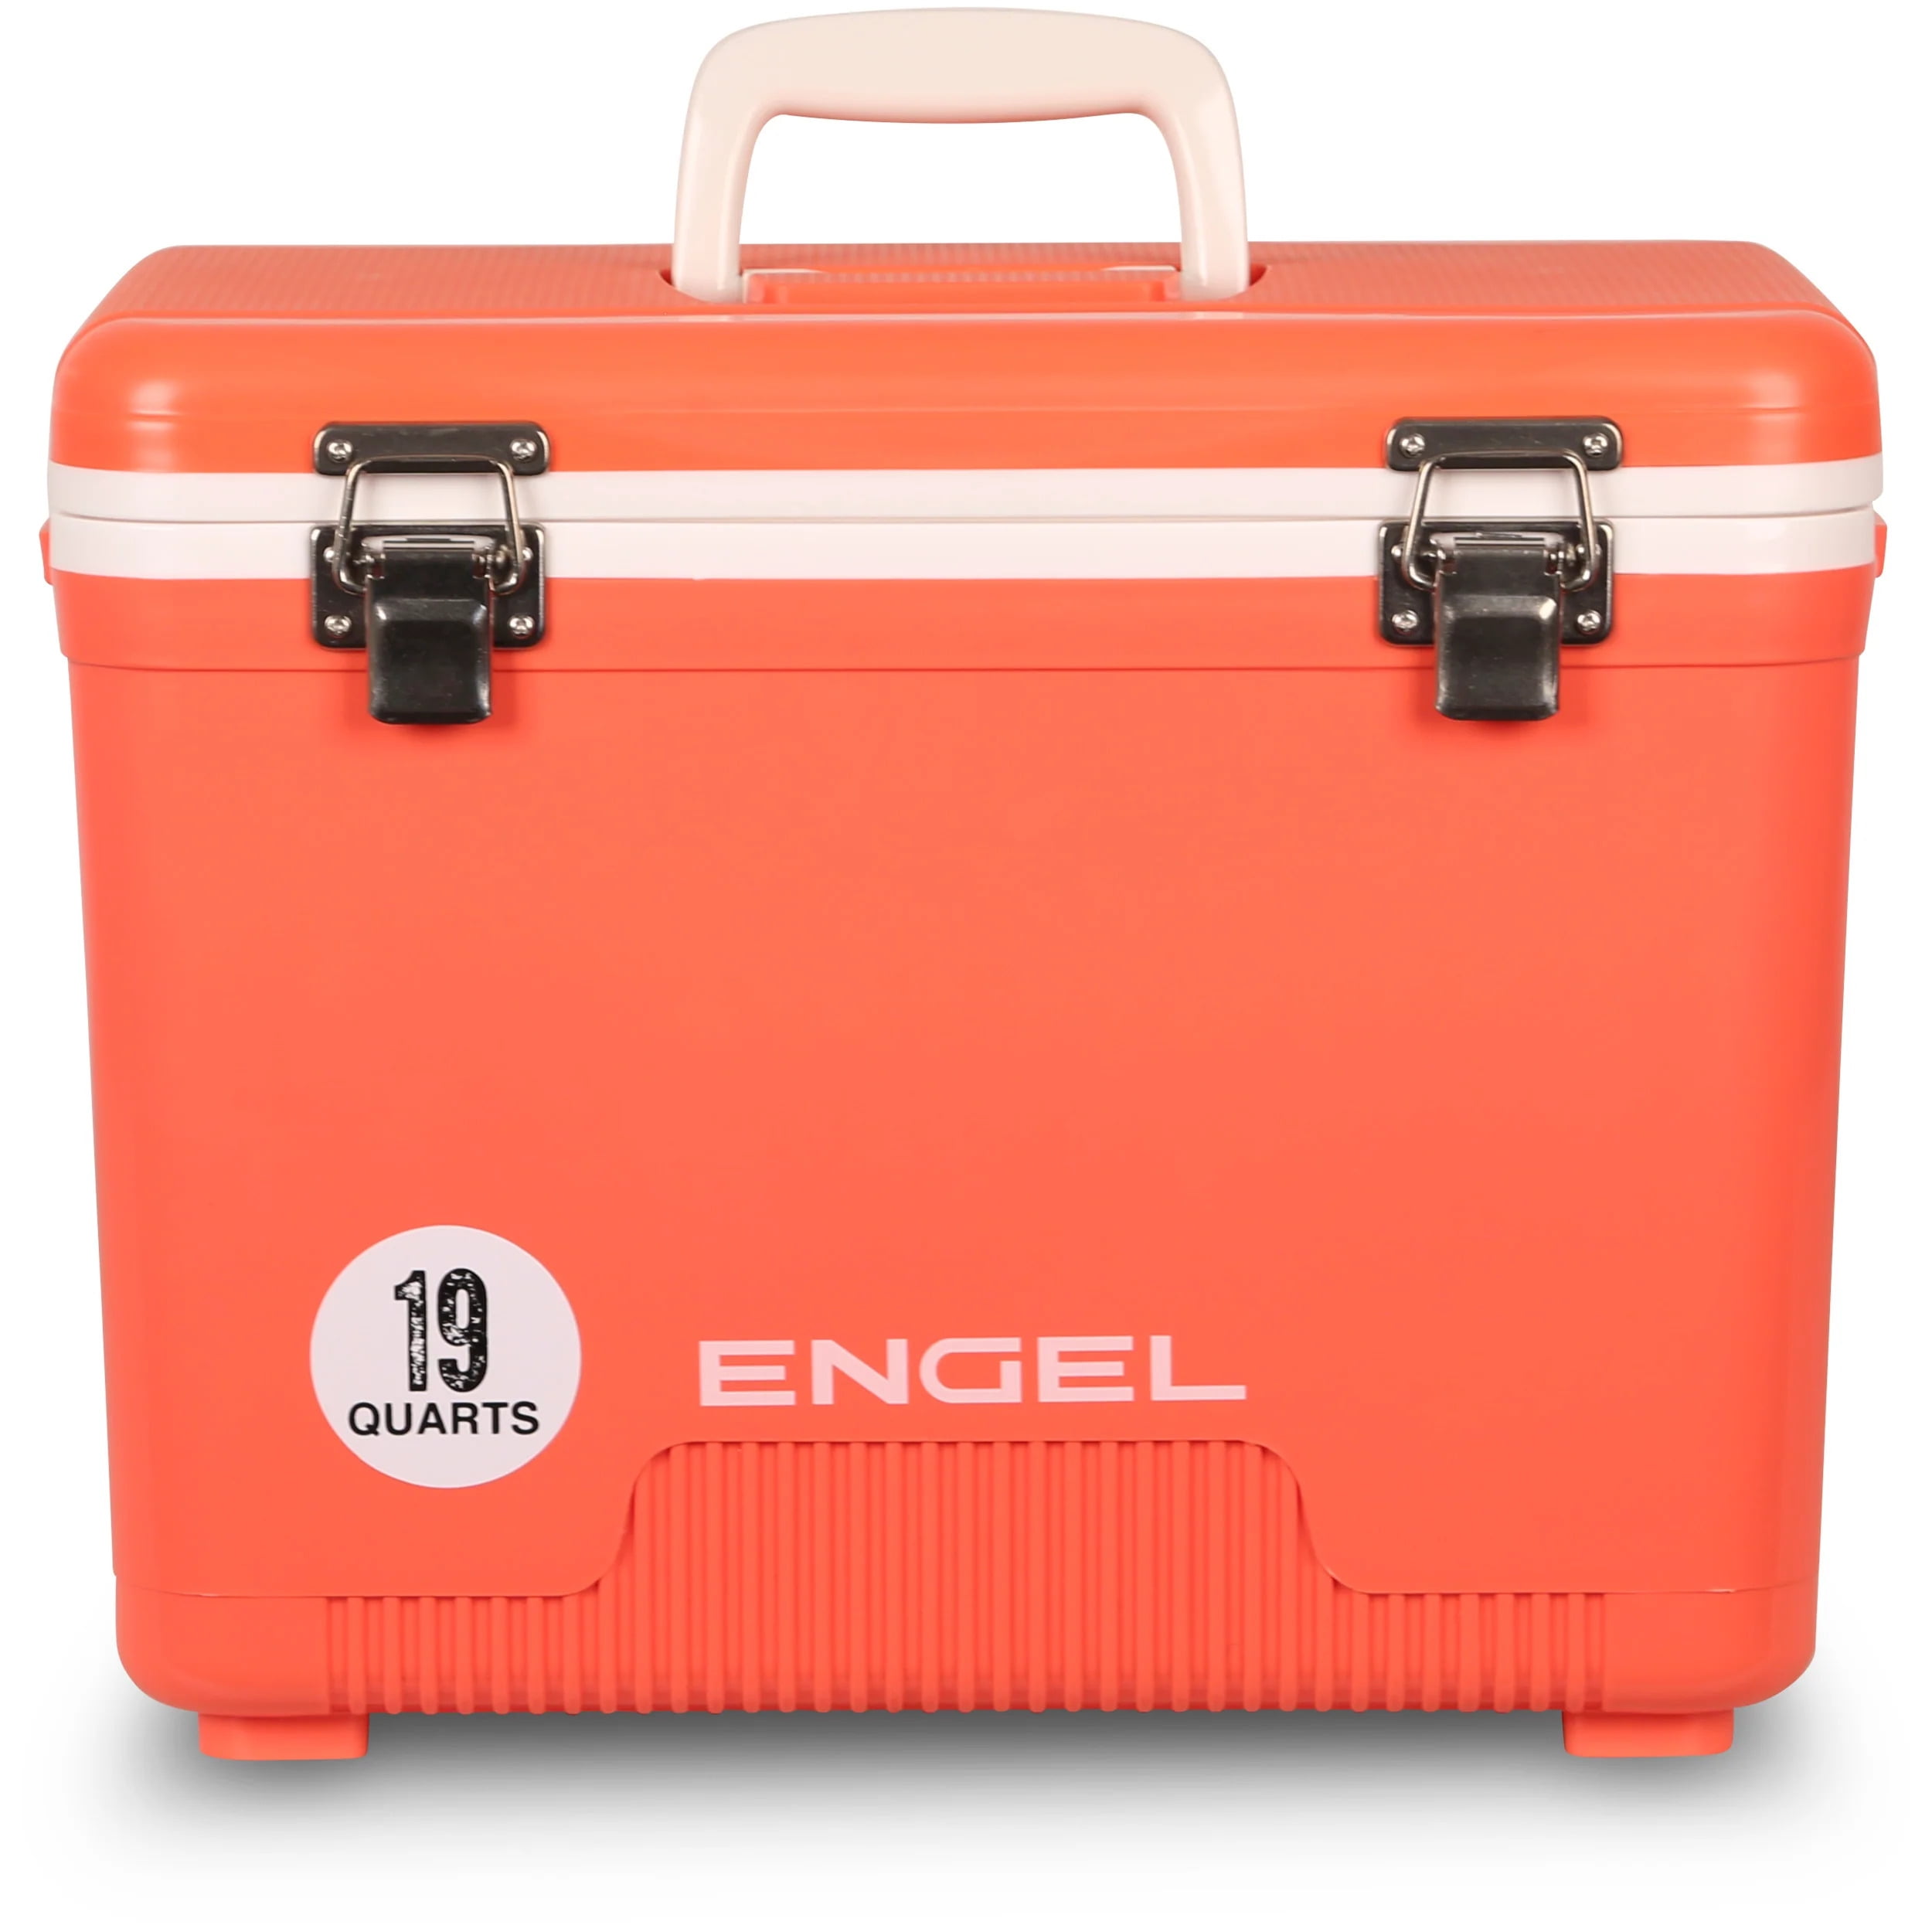 ENGEL 19 Qt Leak-Proof Compact Insulated Drybox Cooler - Coral 